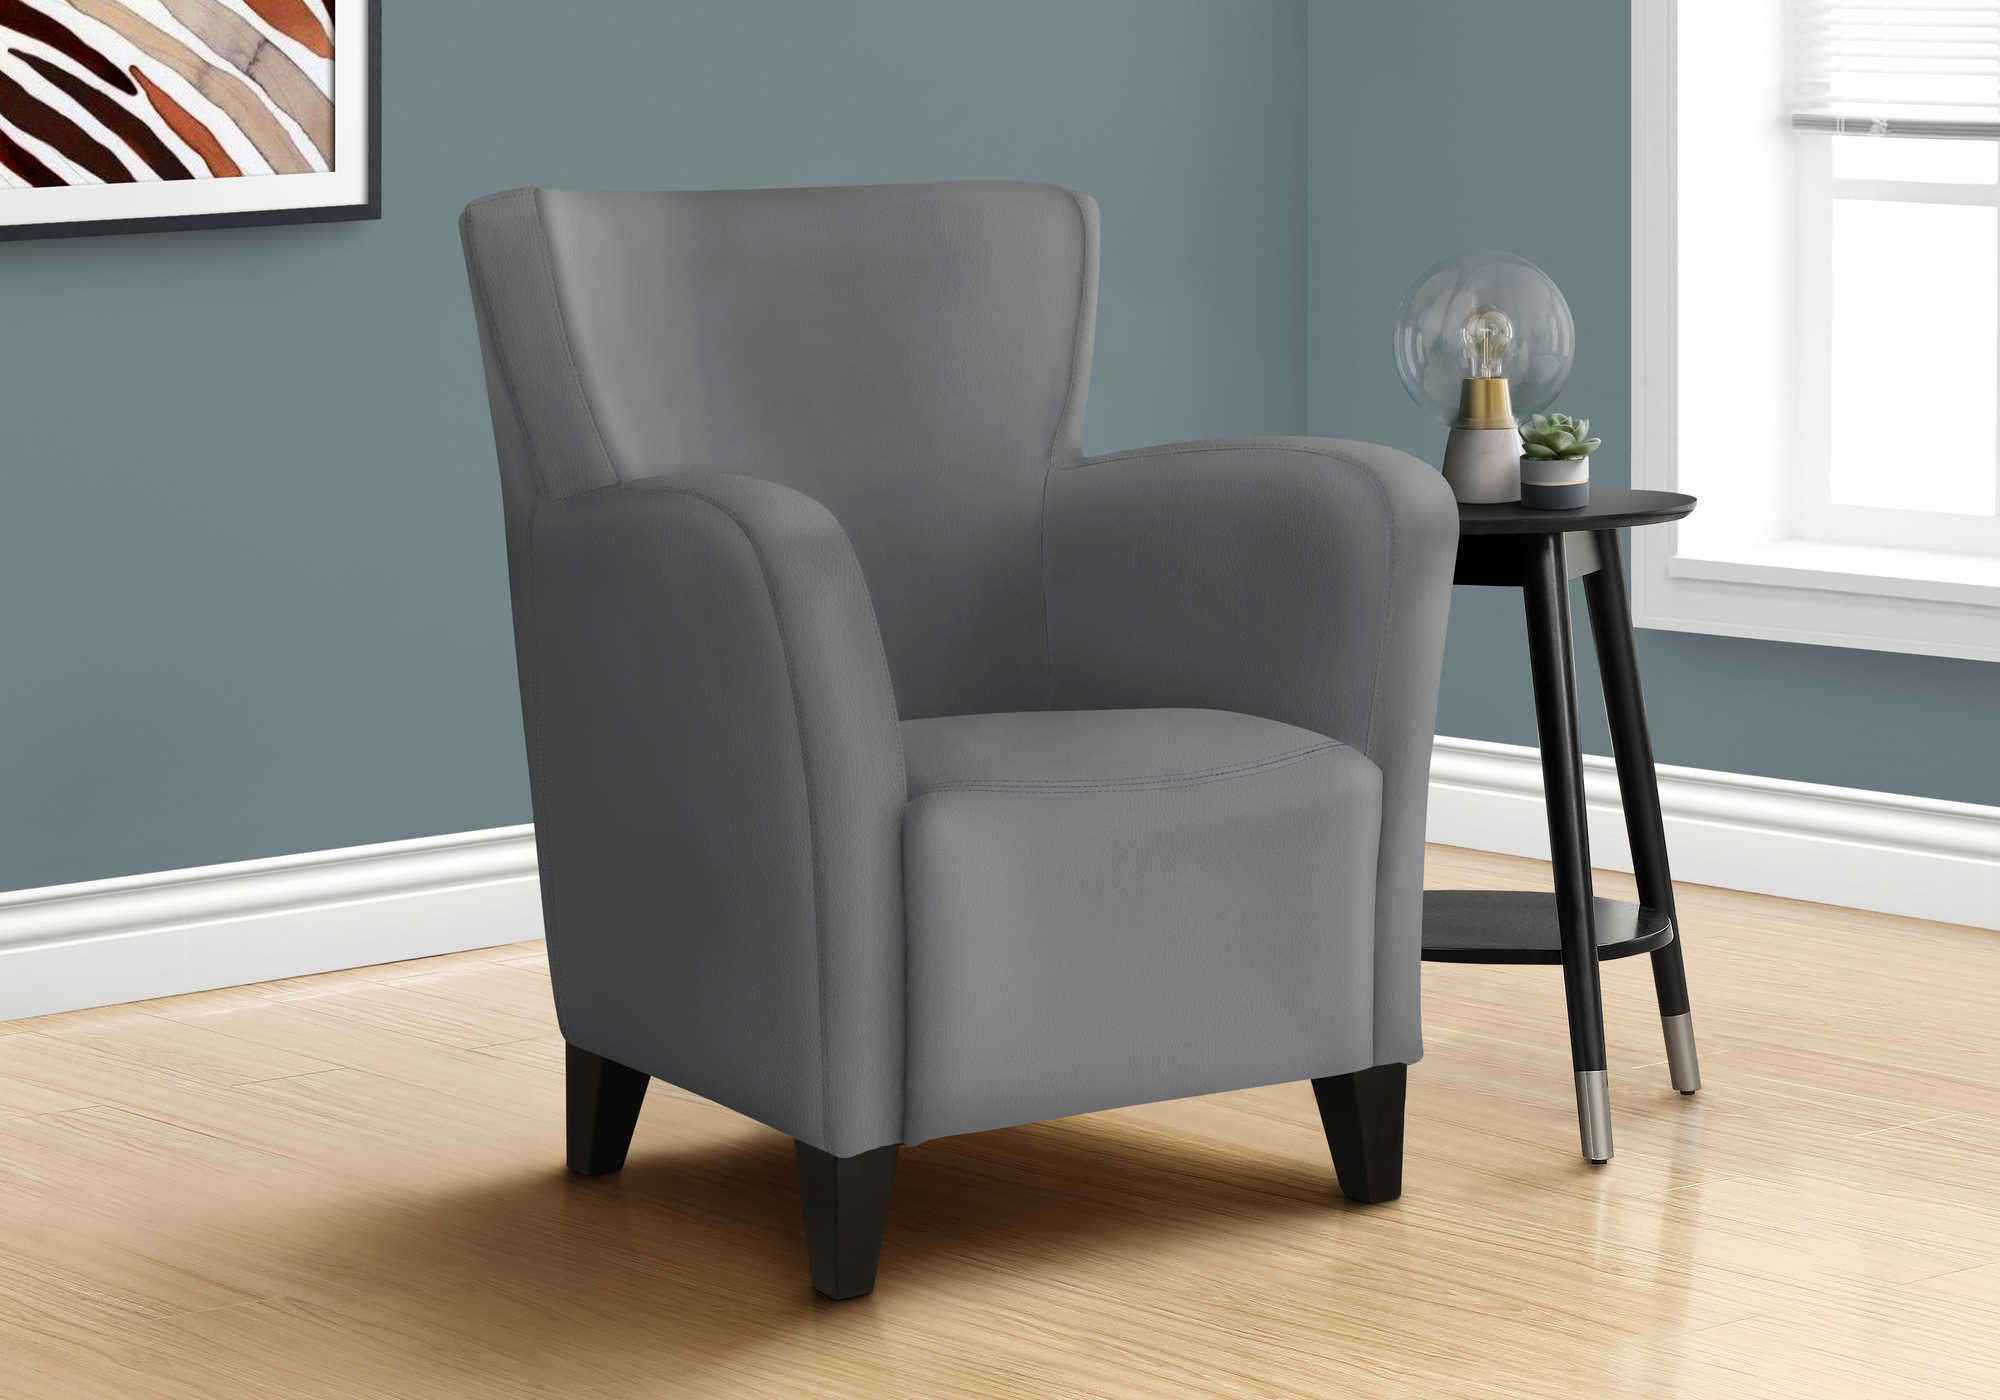 ACCENT CHAIR - GREY LEATHER-LOOK FABRIC